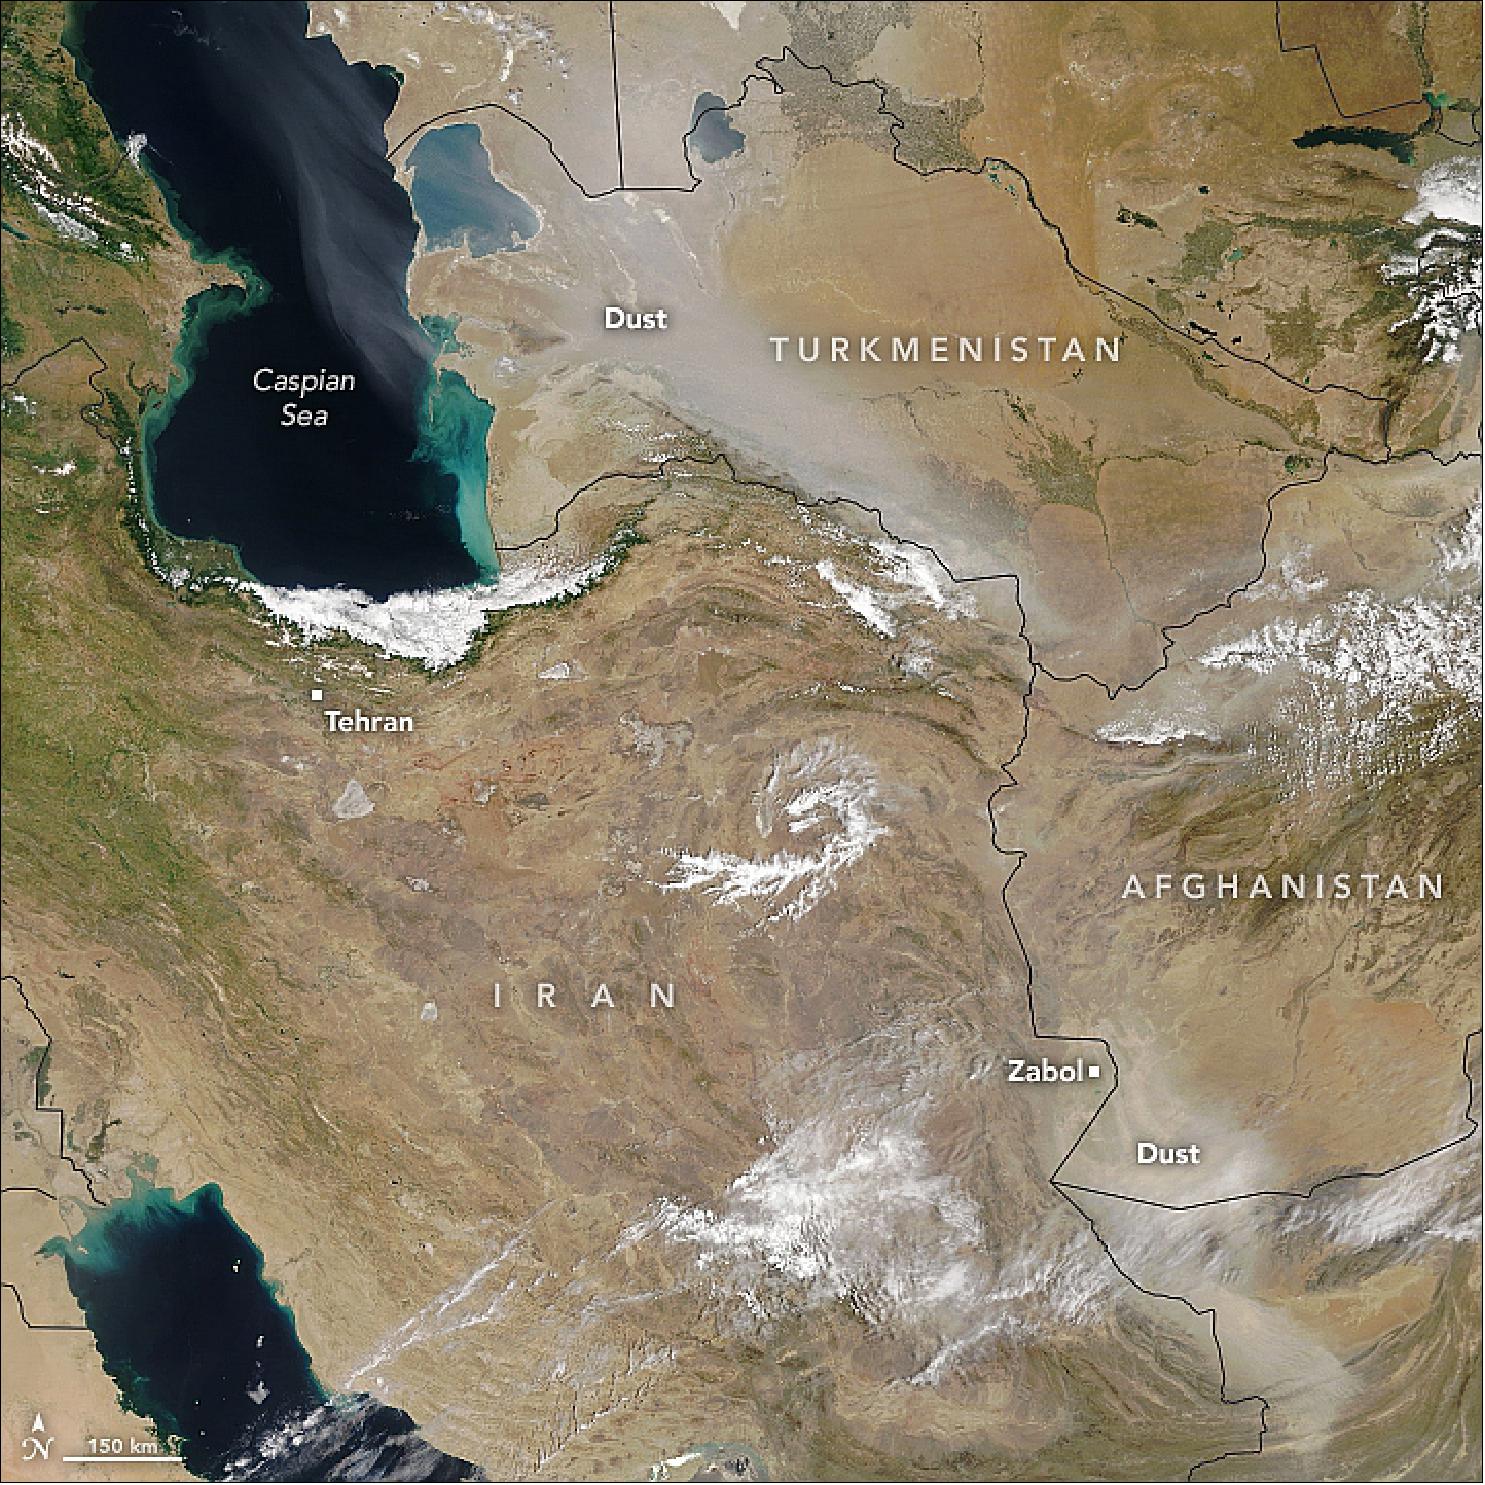 Figure 23: MODIS on NASA's Terra satellite acquired this image of the dust storms on May 28, 2018. Such storms, sometimes known as haboobs, are dramatic events associated with weather fronts, and they often appear as walls of sand and dust marching across the landscape. Like thunderstorms, haboobs tend to abrupt and short-lived (image credit: NASA Earth Observatory, image by Joshua Stevens, using MODIS data from LANCE/EOSDIS Rapid Response, story by Mike Carlowicz)